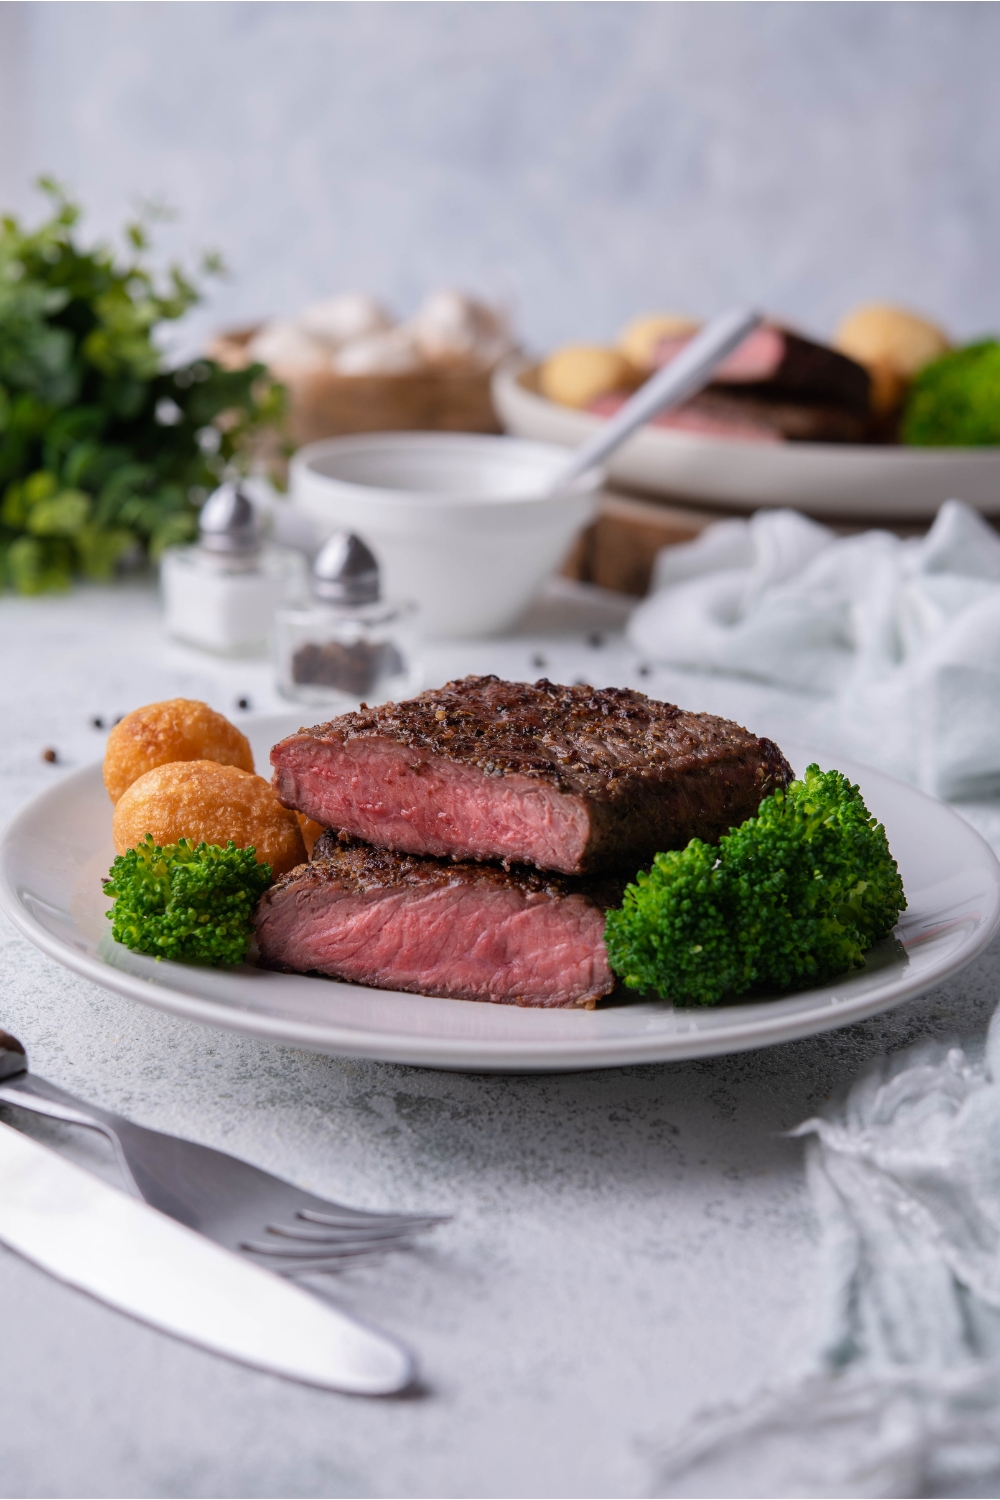 Flat iron steak cut in half with each half stacked on each other, on a white plate with broccoli and nuggets on the plate.